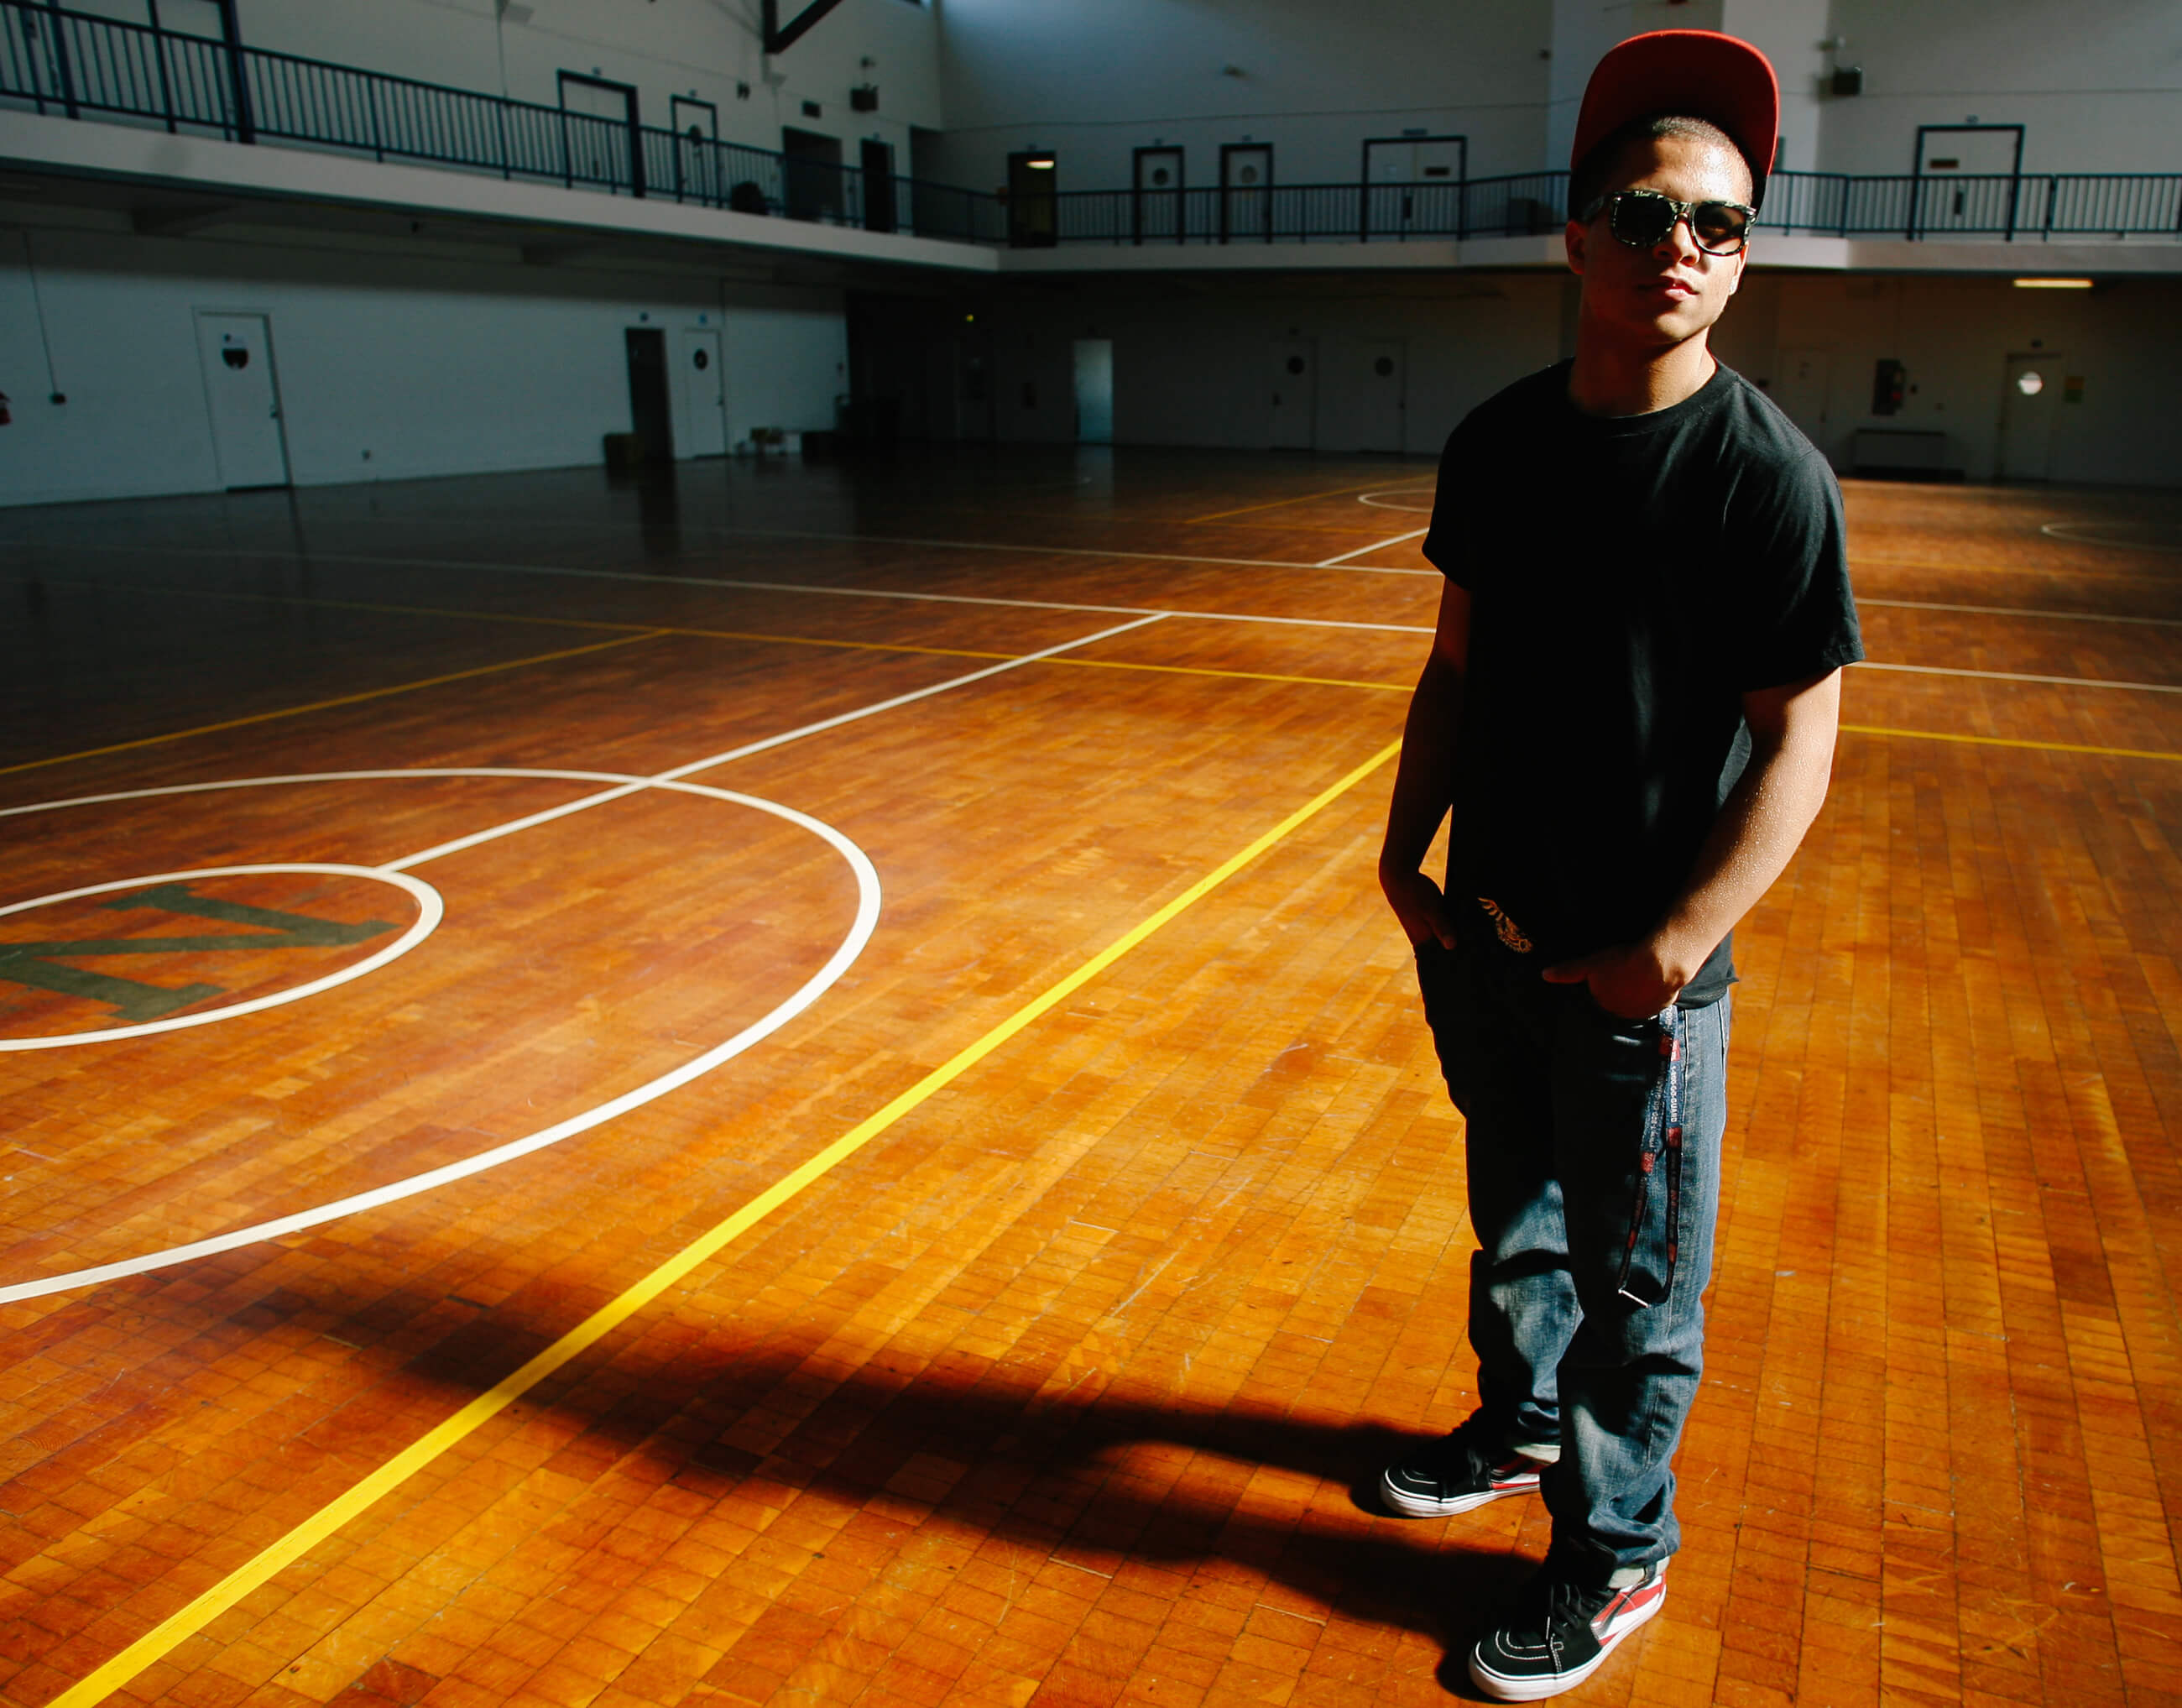 A student poses in a gym for a portrait in Seattle Washington